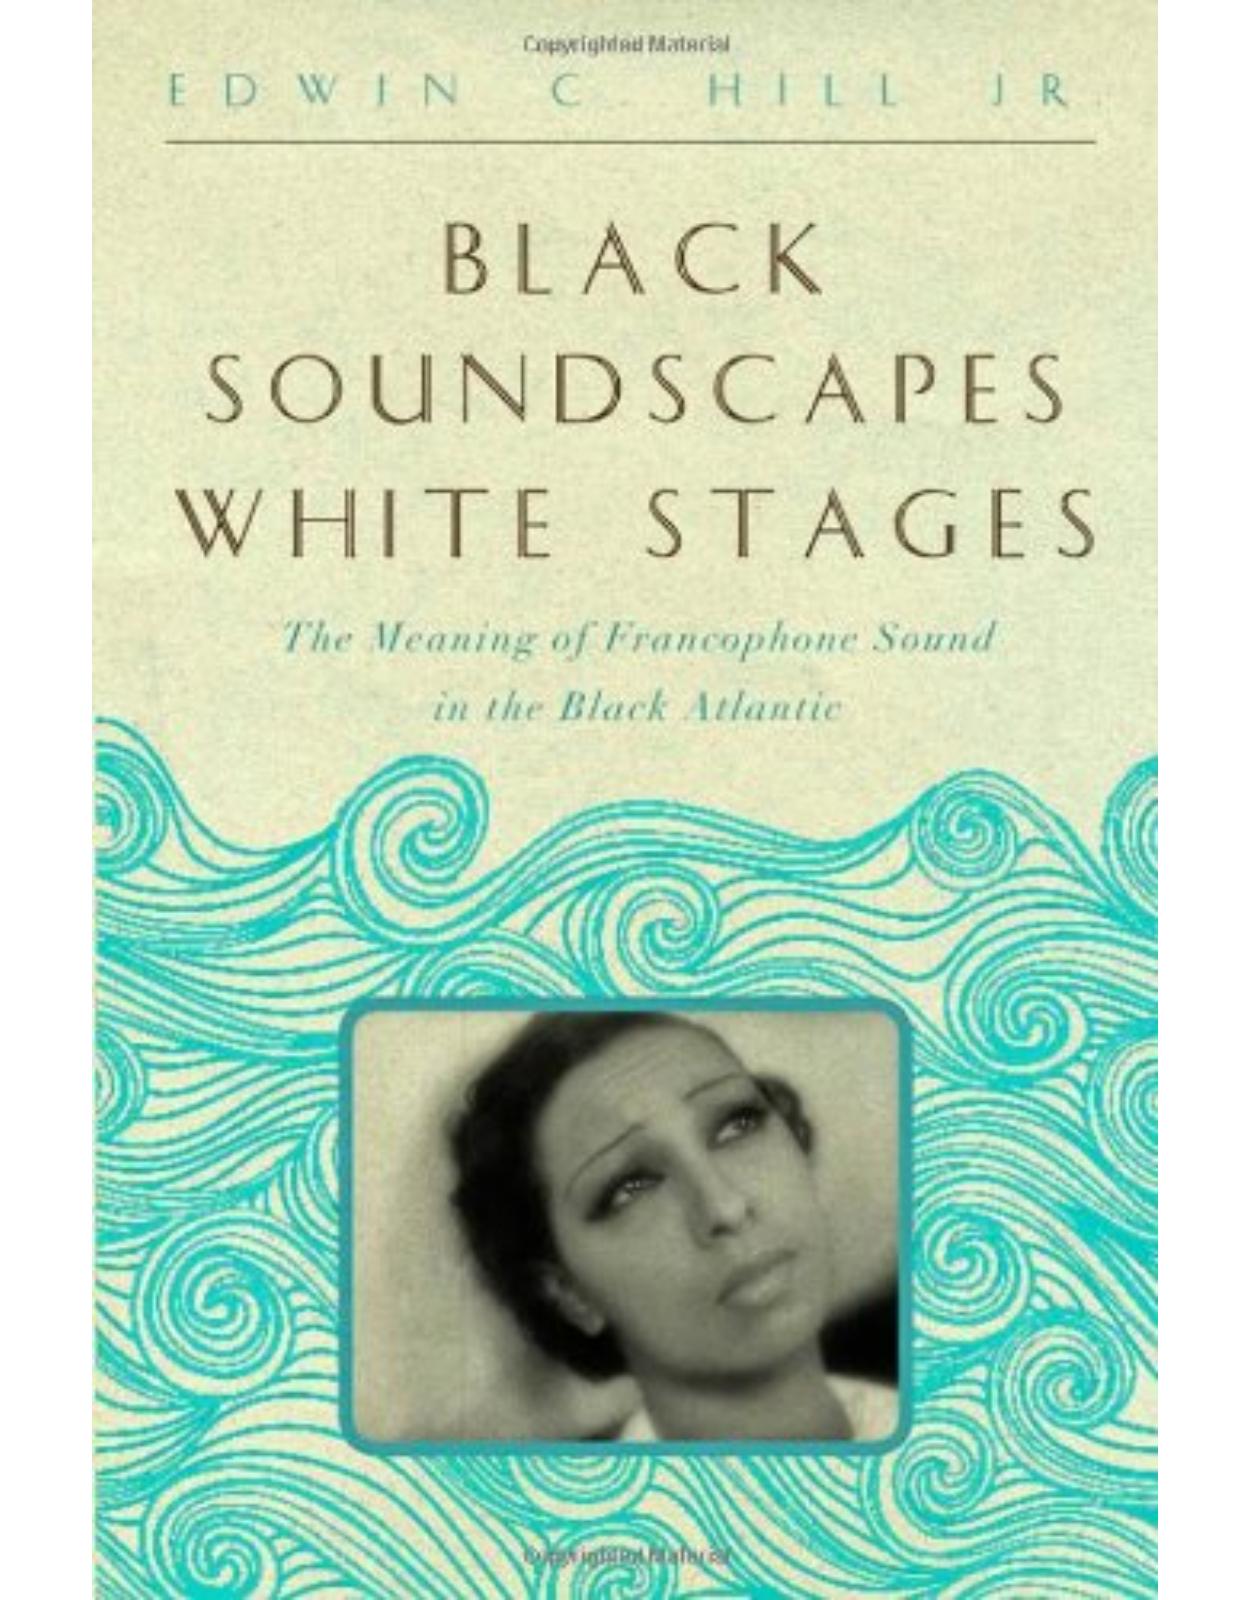 Black Soundscapes White Stages. The Meaning of Francophone Sound in the Black Atlantic